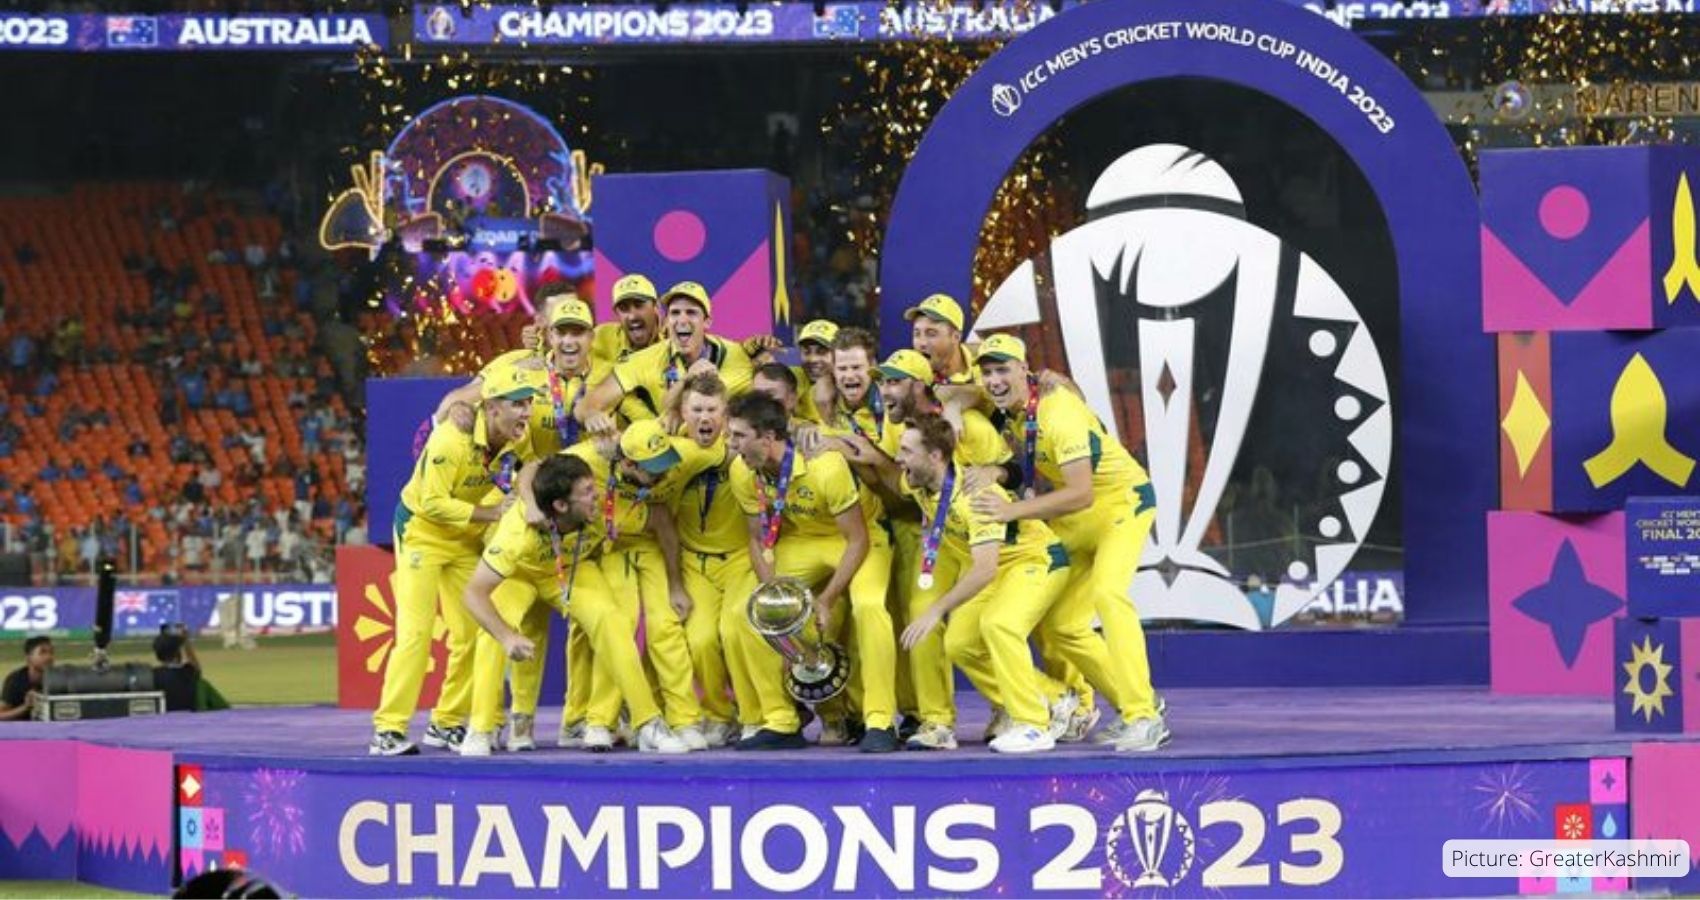 Feature and Cover Travis Head's Heroics Lead Australia to Sixth Men's Cricket World Cup Title